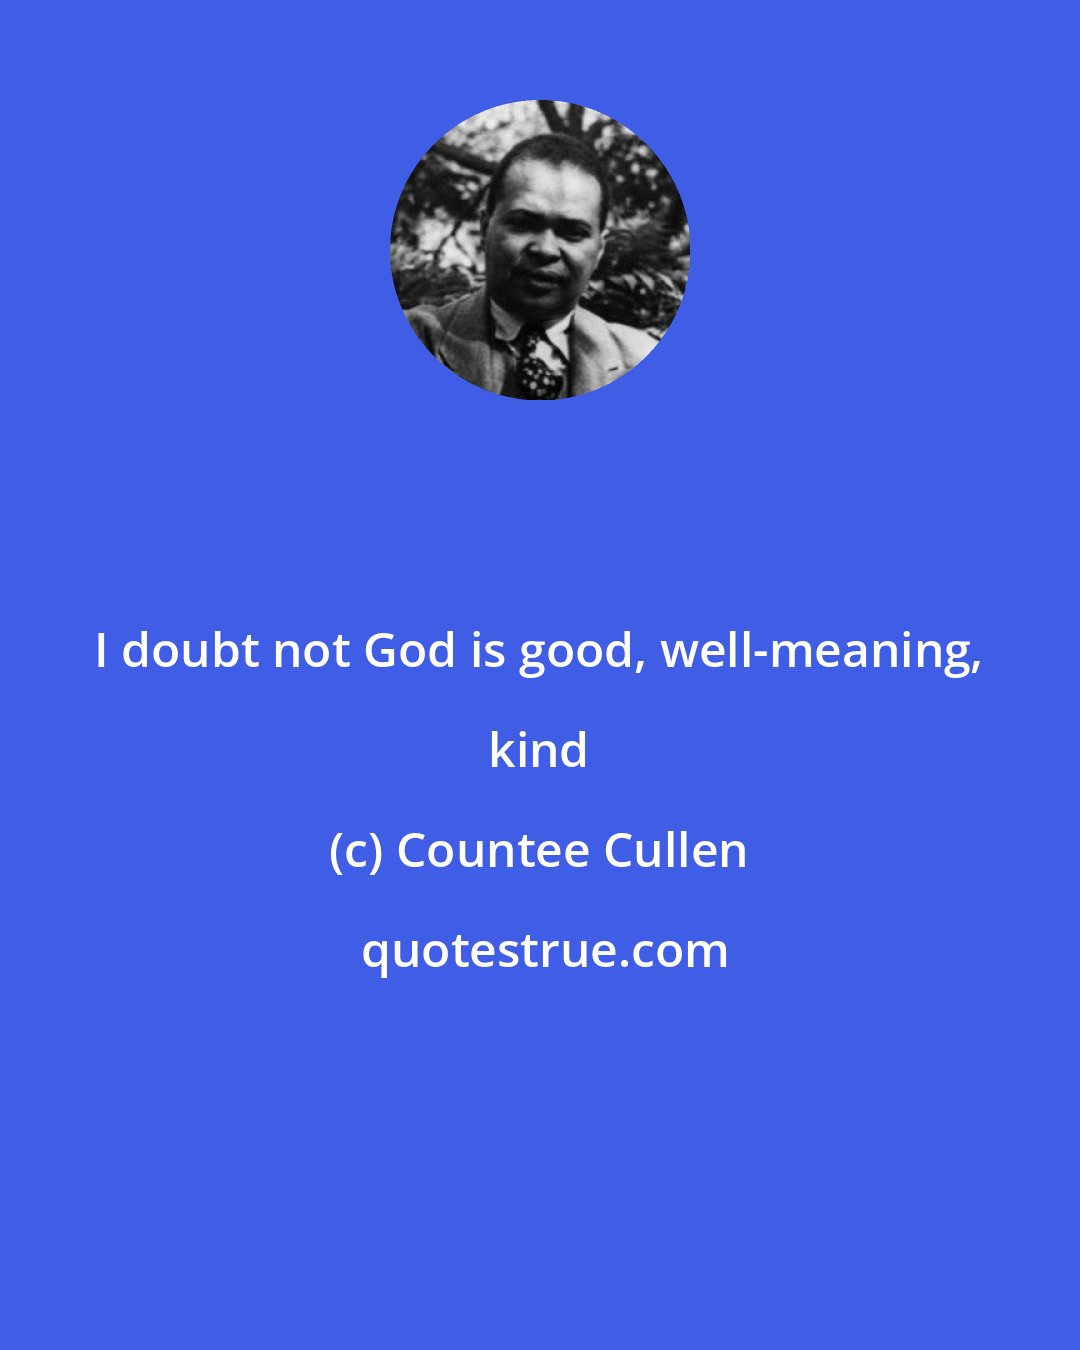 Countee Cullen: I doubt not God is good, well-meaning, kind